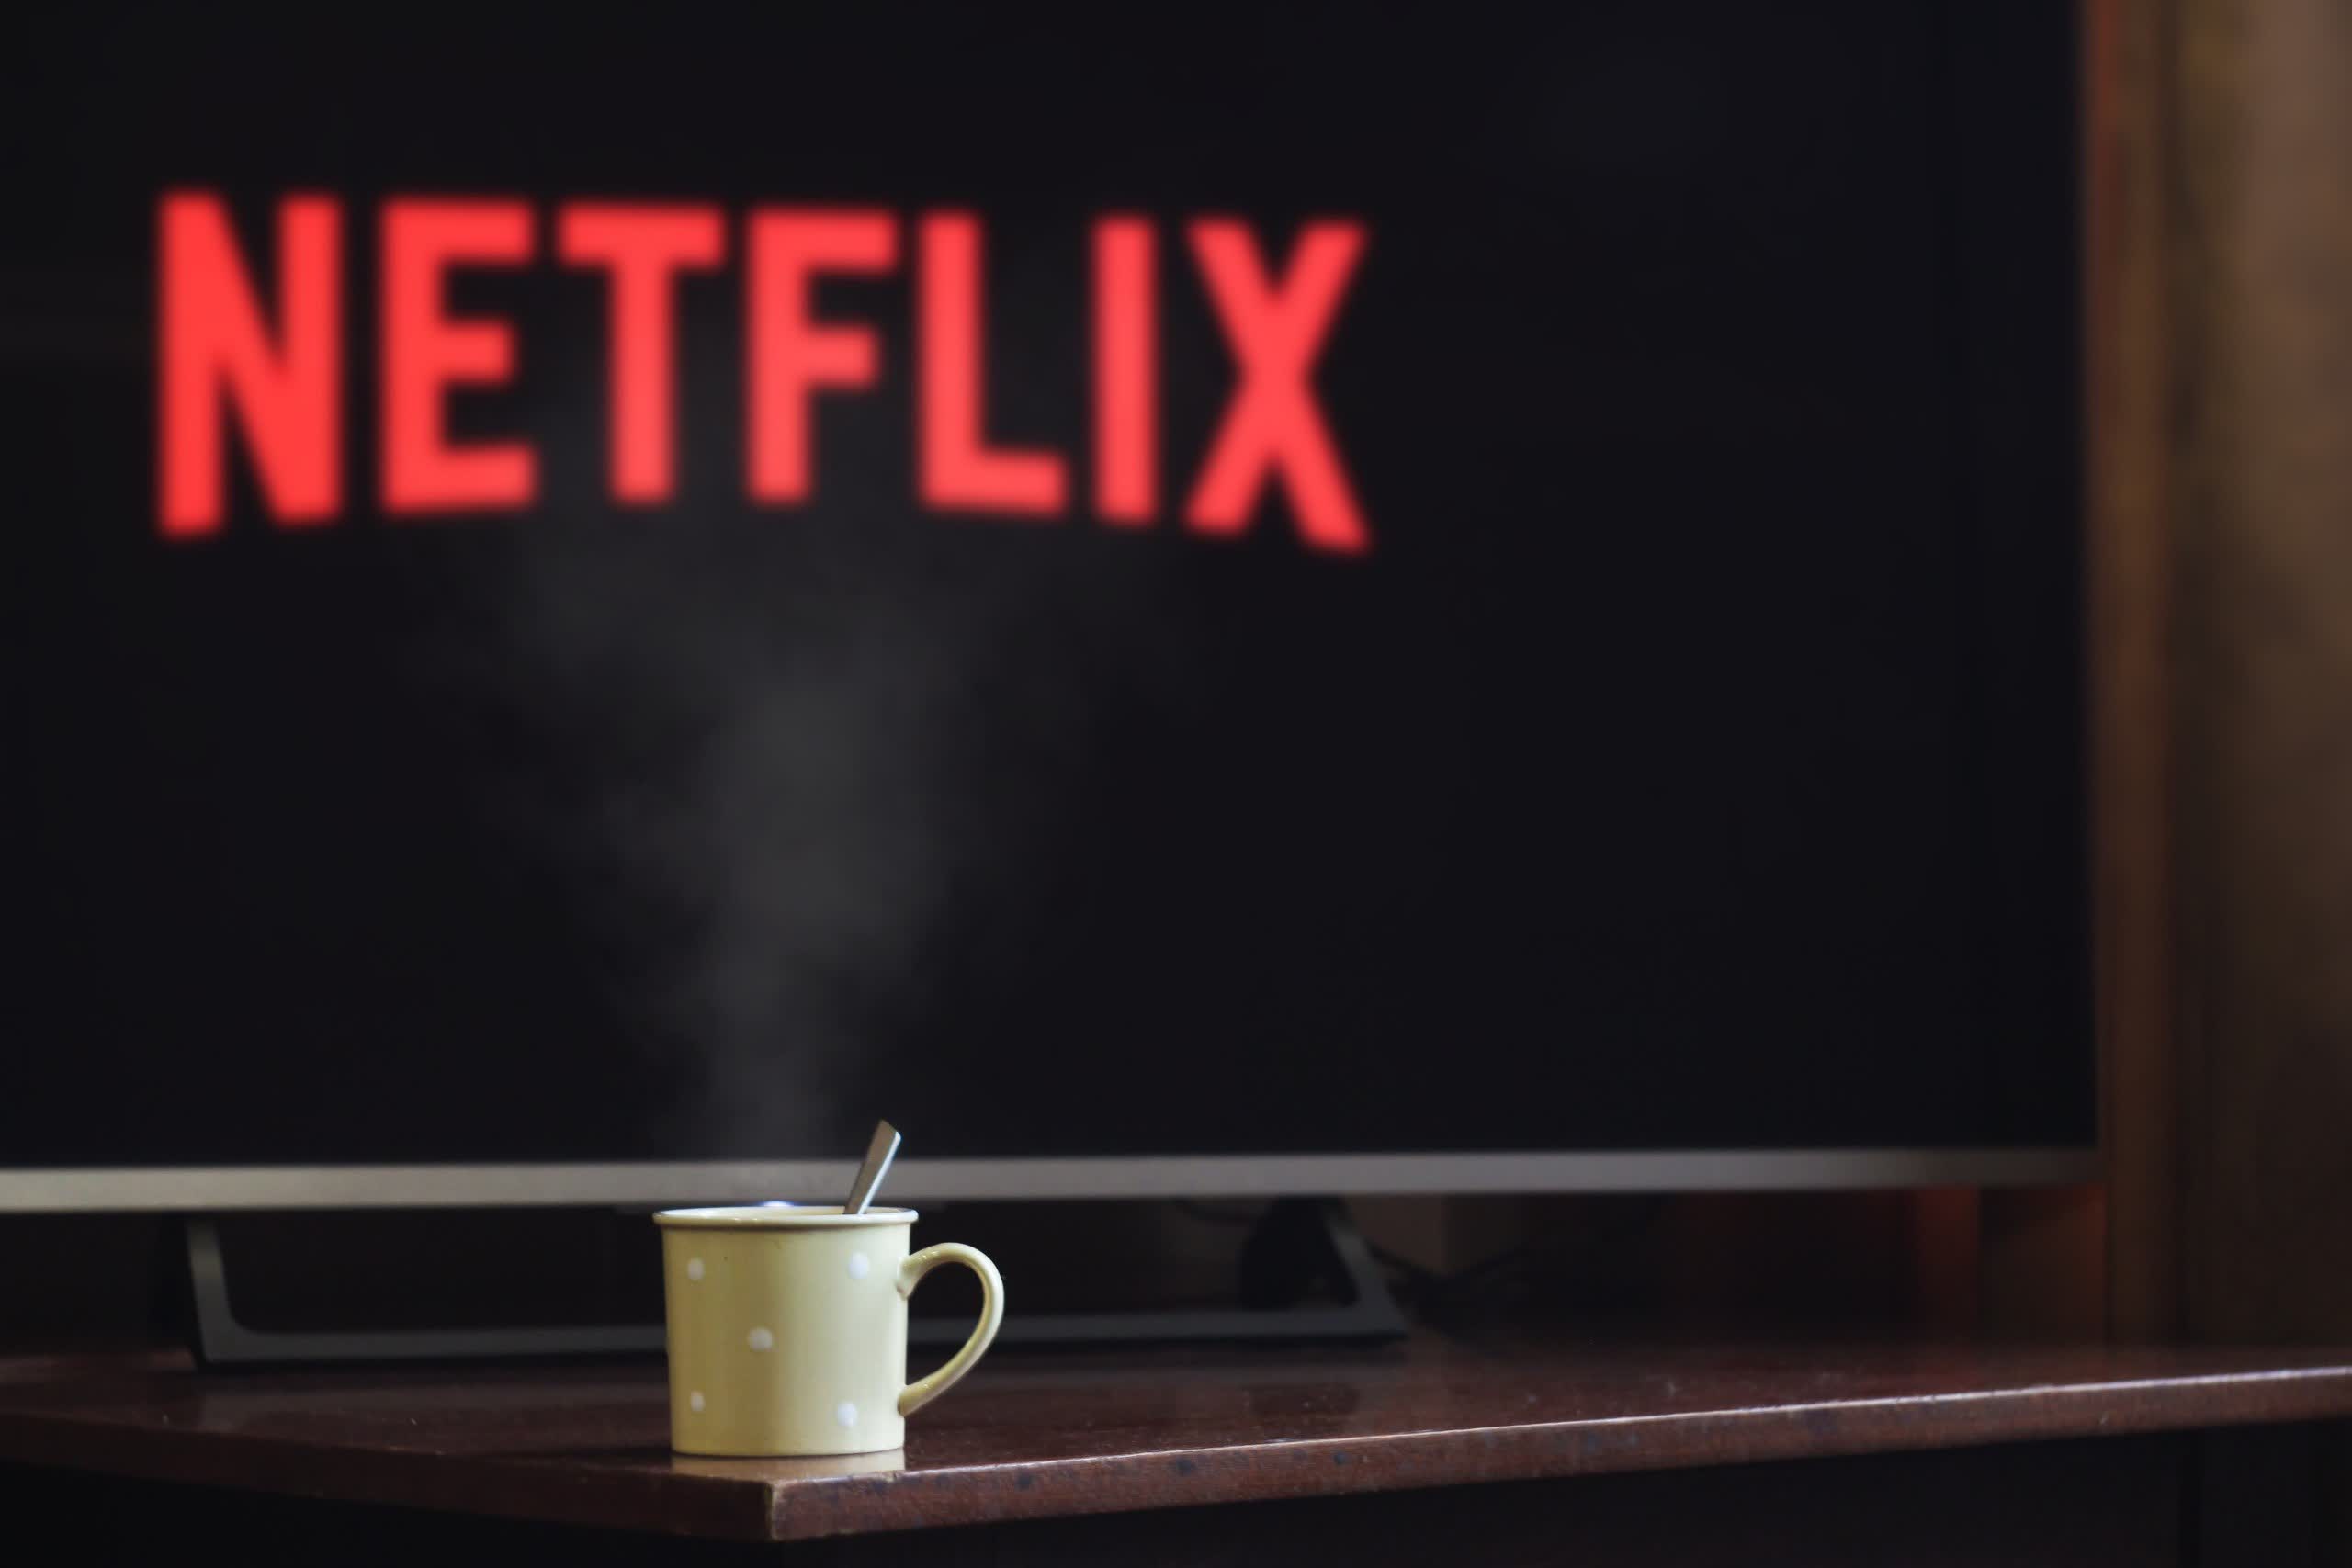 Netflix cracks down on password sharing by charging subscribers to add extra homes